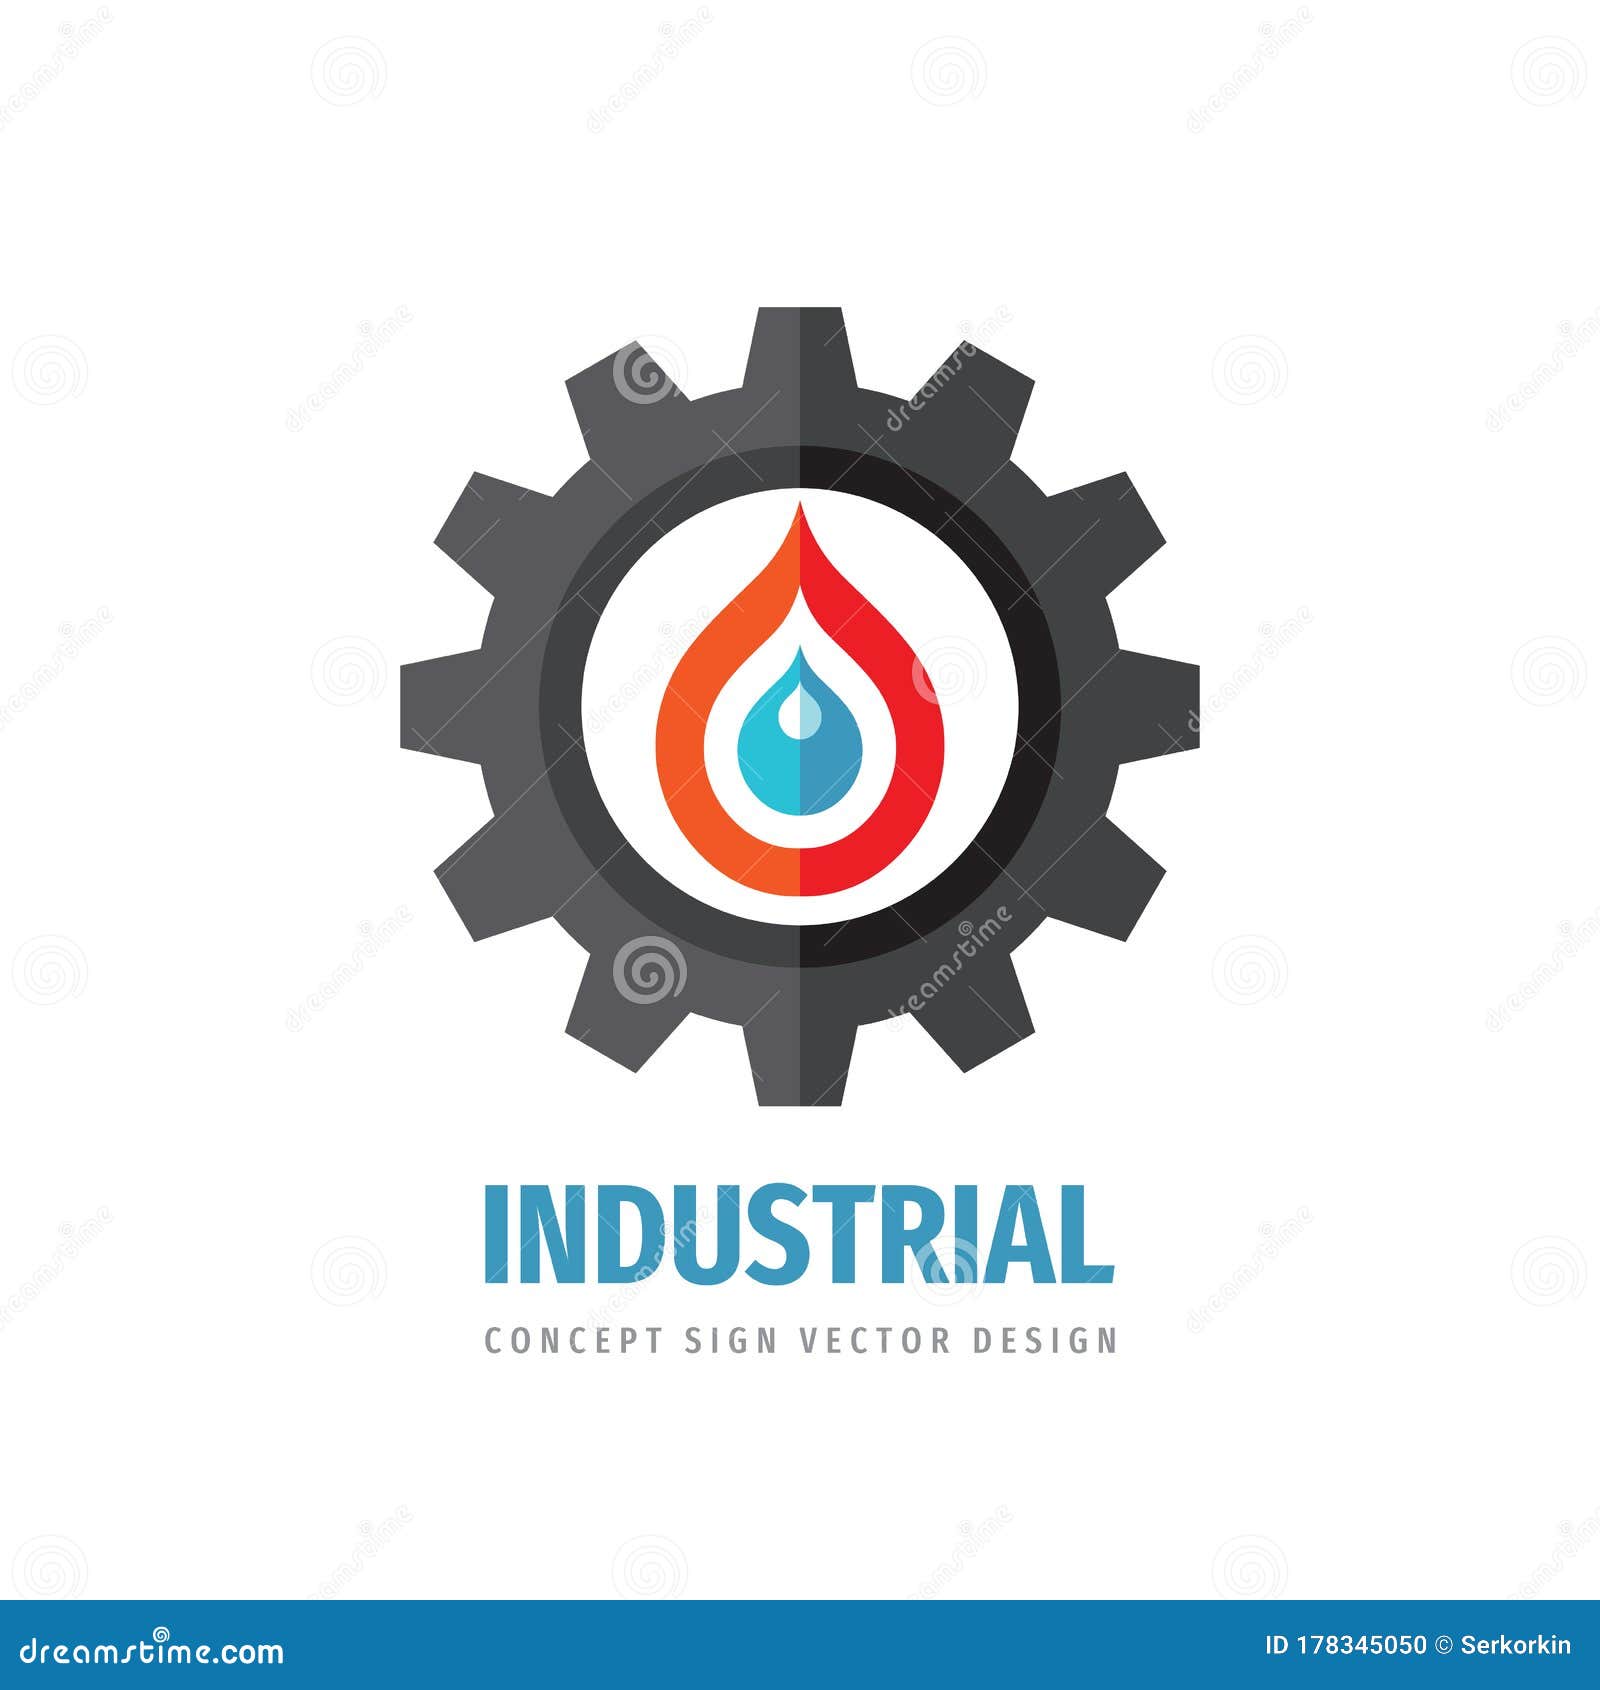 Industrial Logo Template Design. Gear Icon. Water Drop & Fire Flame ... Industrial Company Logo